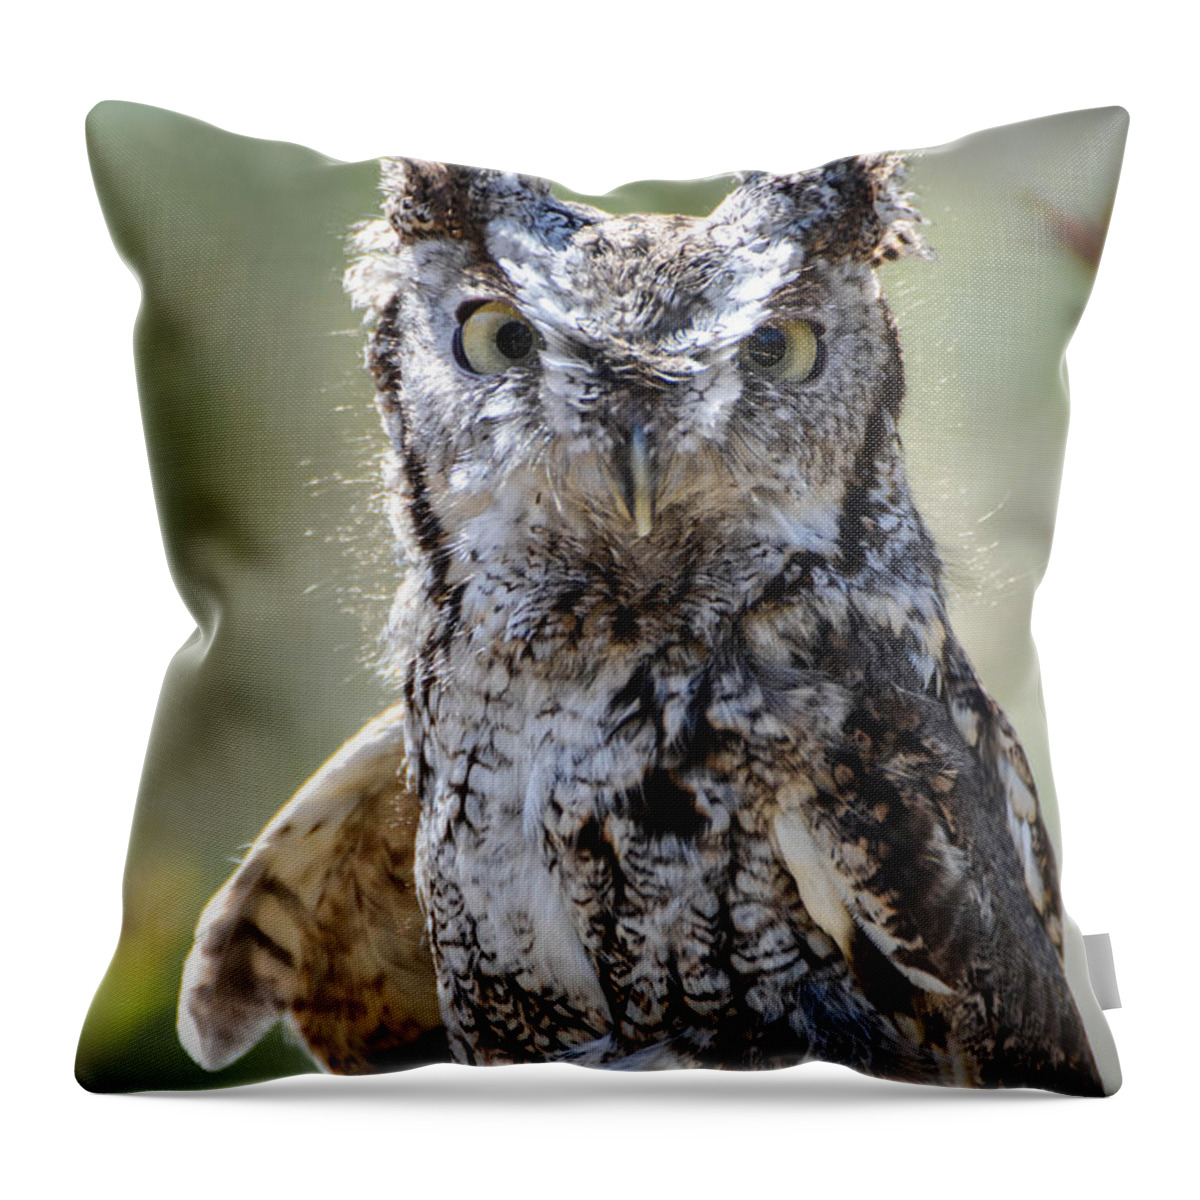 Owl Throw Pillow featuring the photograph Screech Owl by Amy Porter